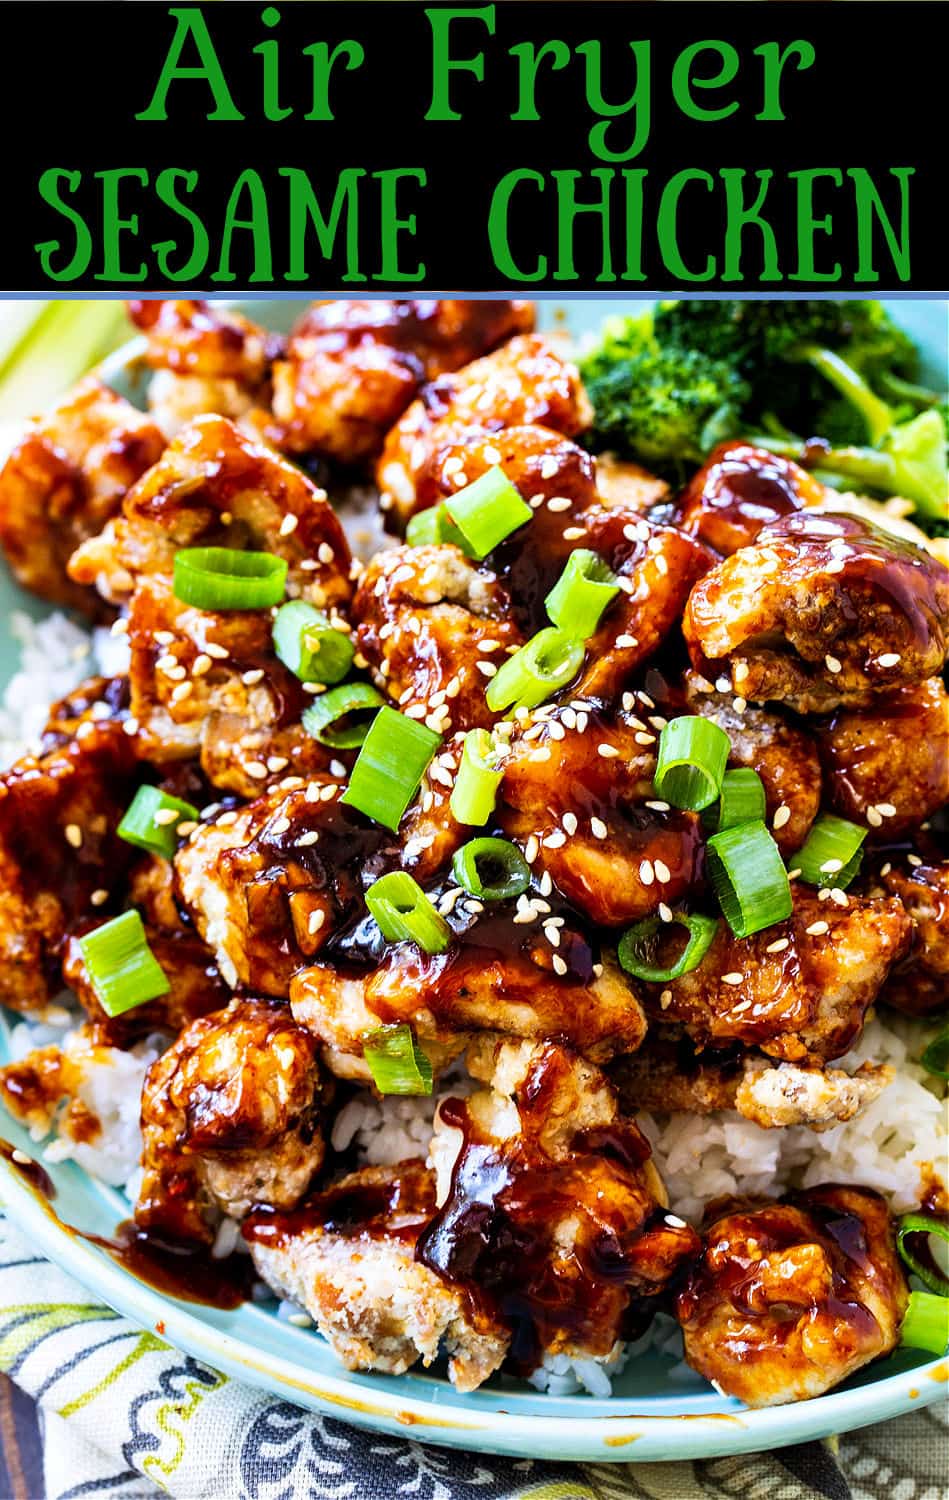 Sesame Chicken over rice in a bowl.